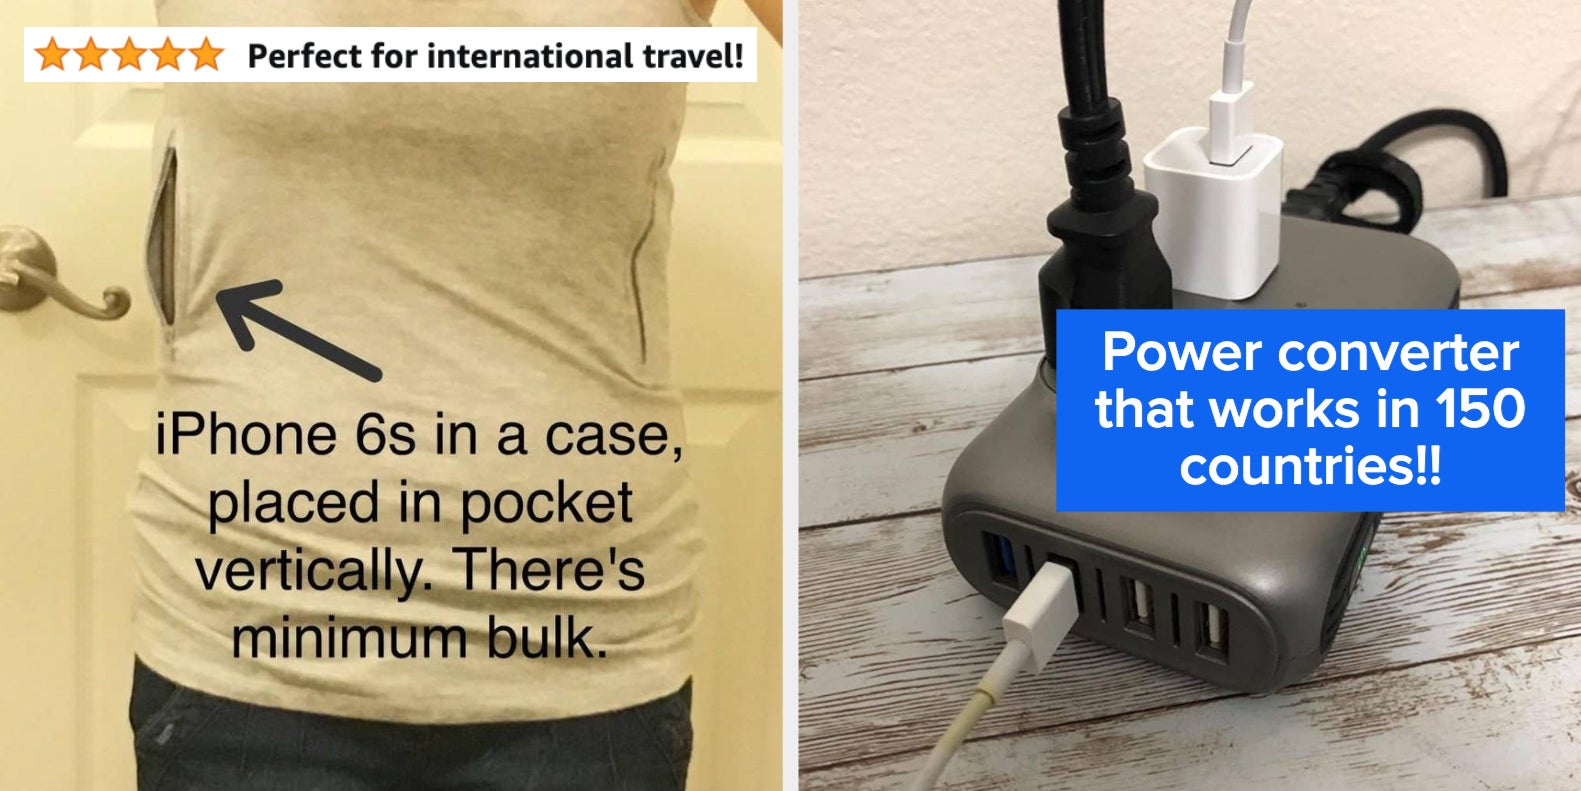 11 International Travel Essentials (stuff you actually need)